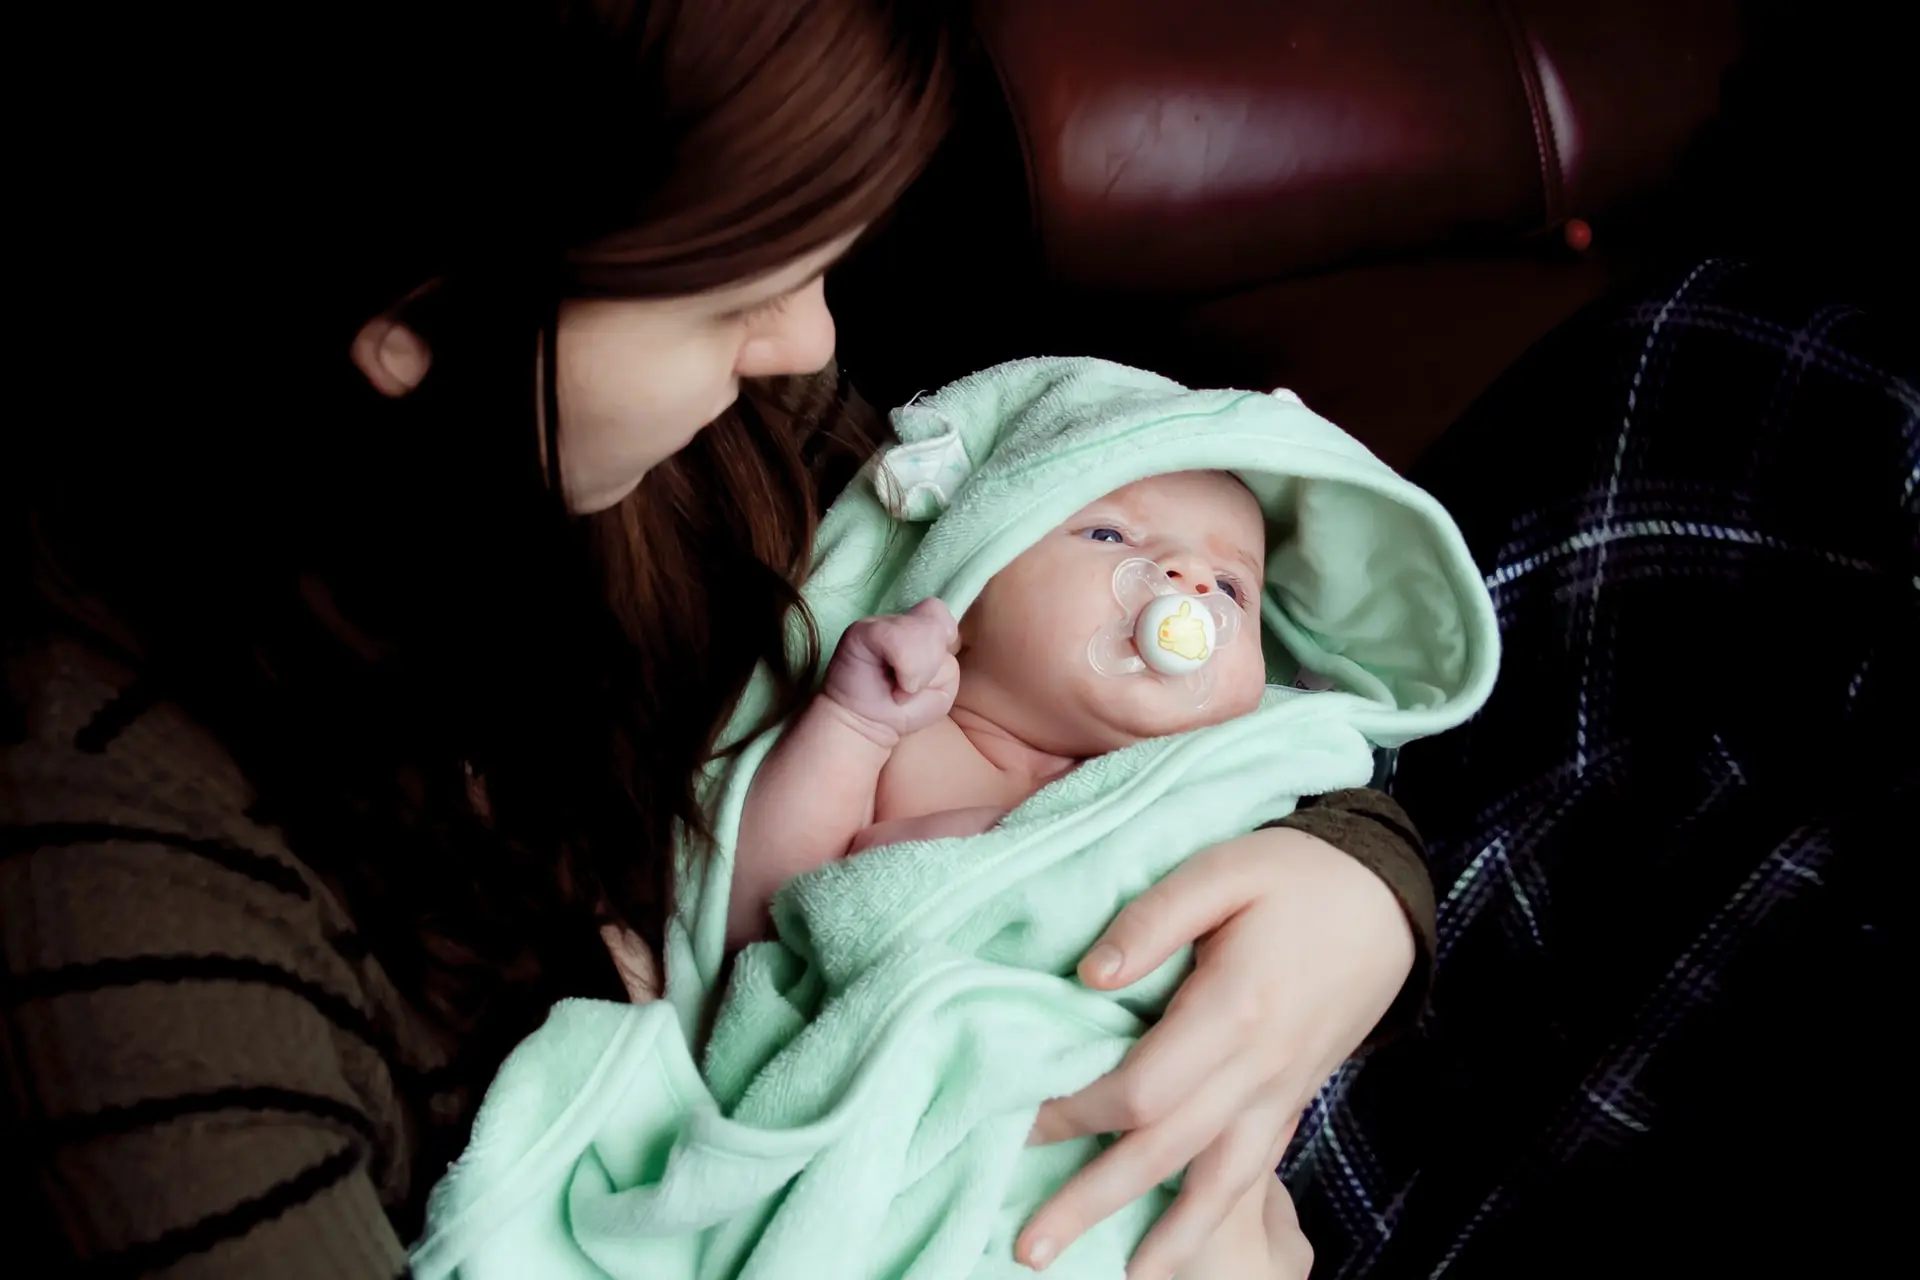 Mother holds her swaddled baby in her arms.